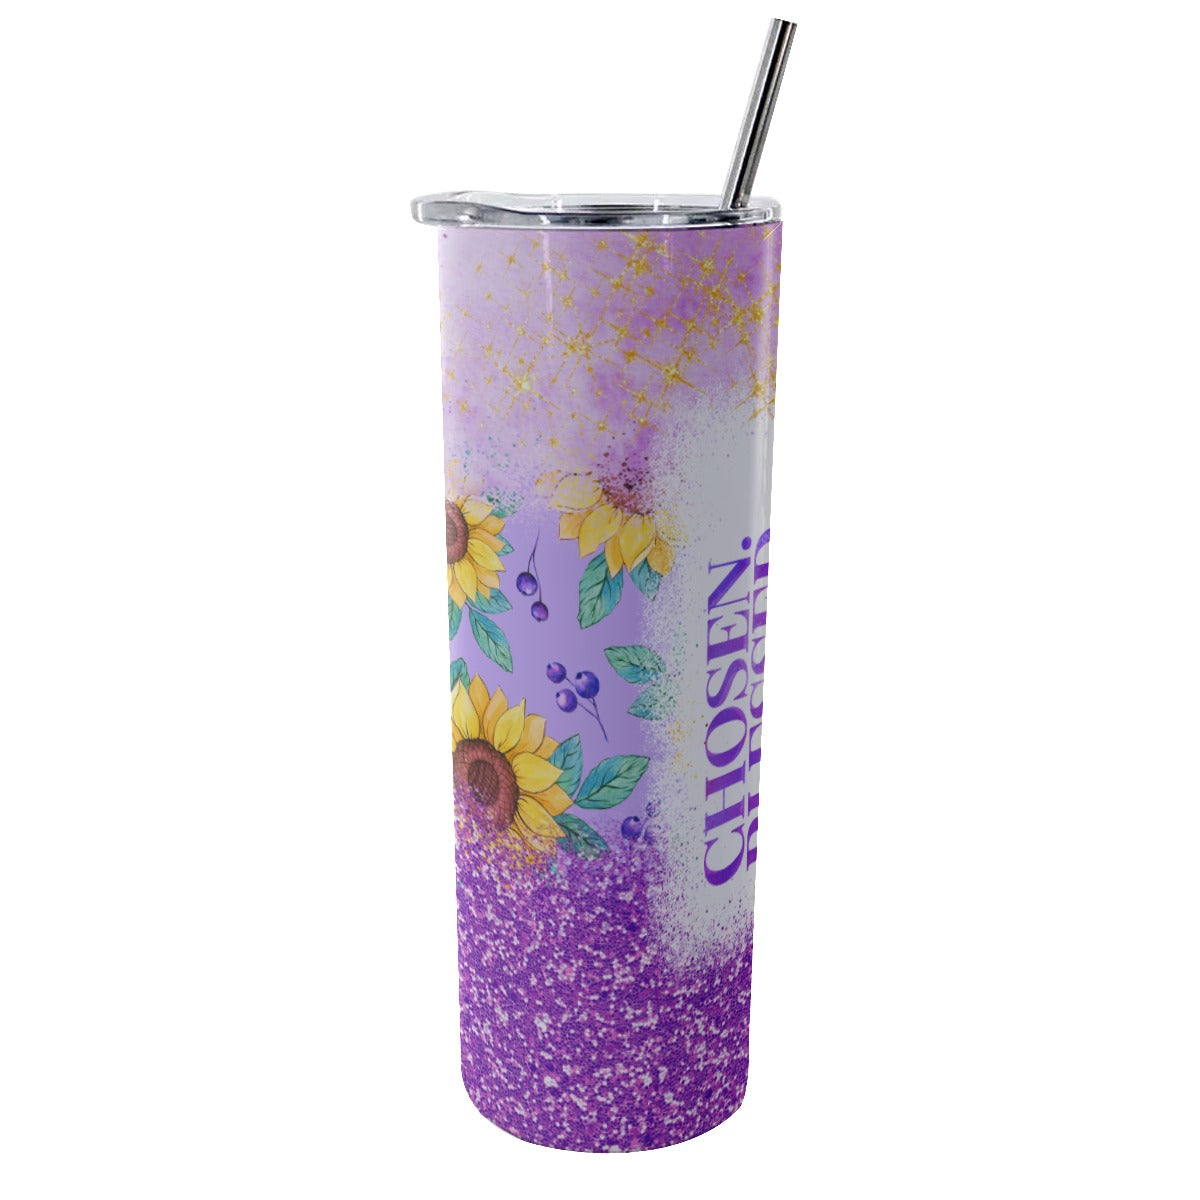 Chosen -Redeemed Tumbler With Stainless Steel Straw 20oz